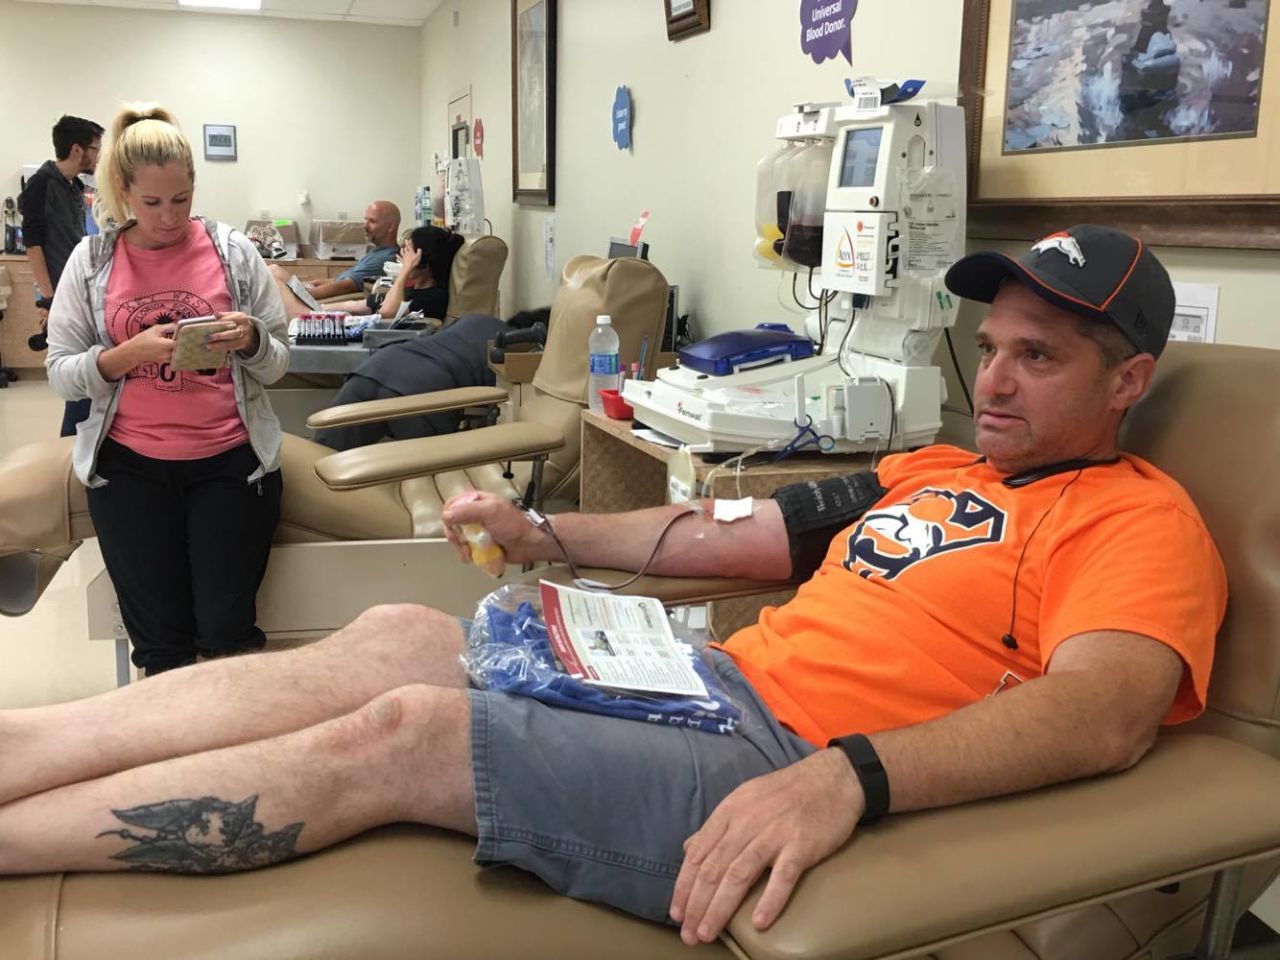 Jeremy Glatstein donates blood in Orlando on June 12. He drove an hour to the donation center to show his support for the shooting victims.